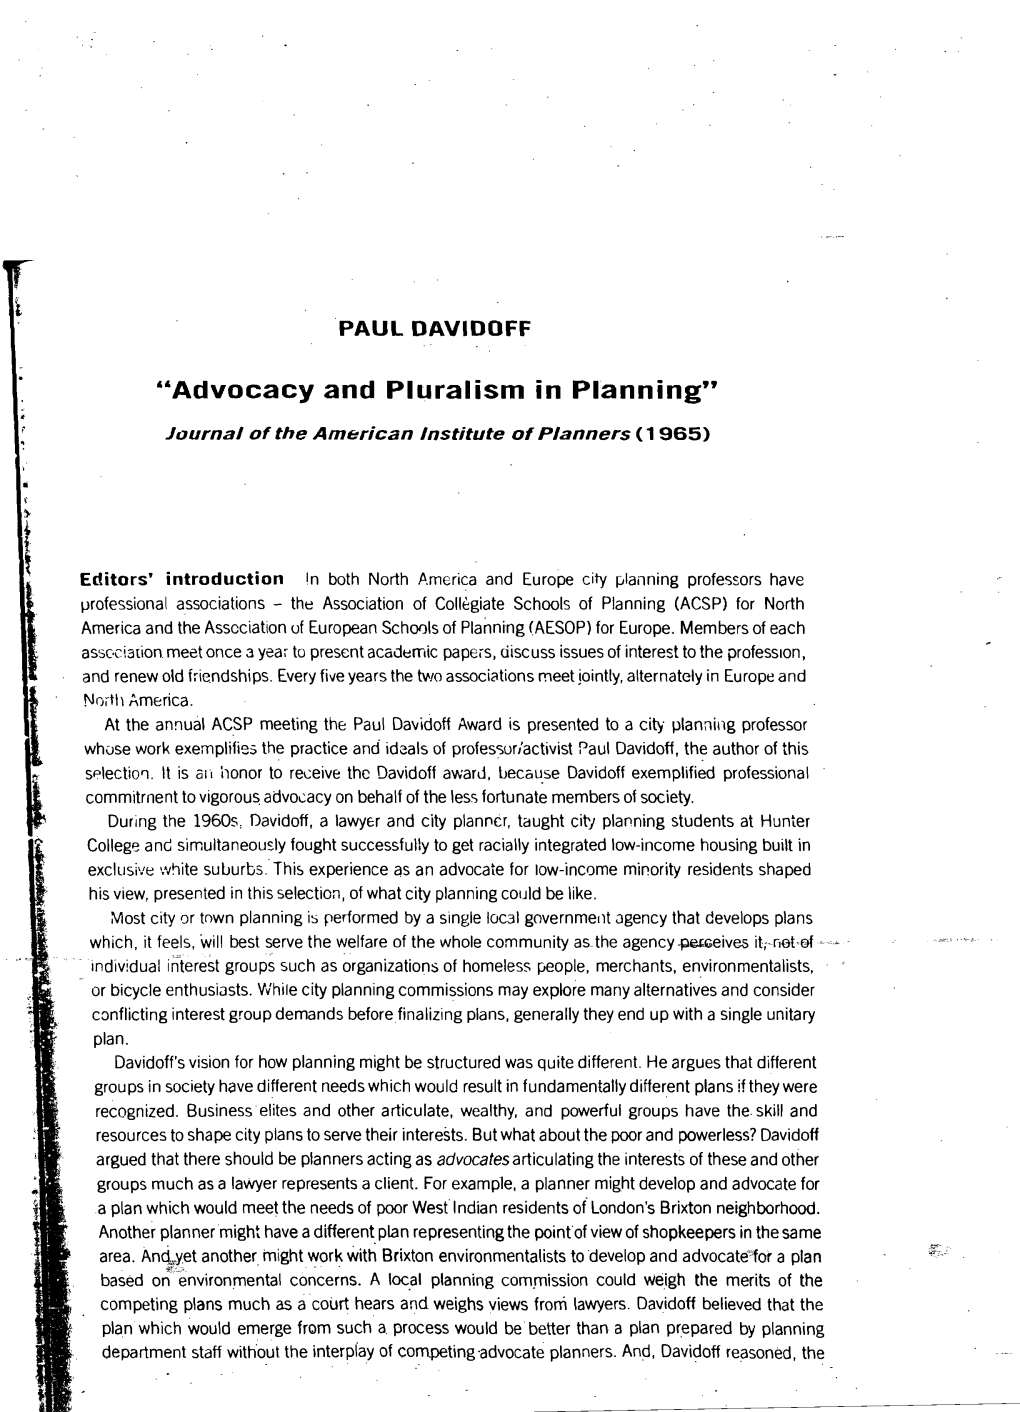 "Advocacy and Pluralism in Planning"